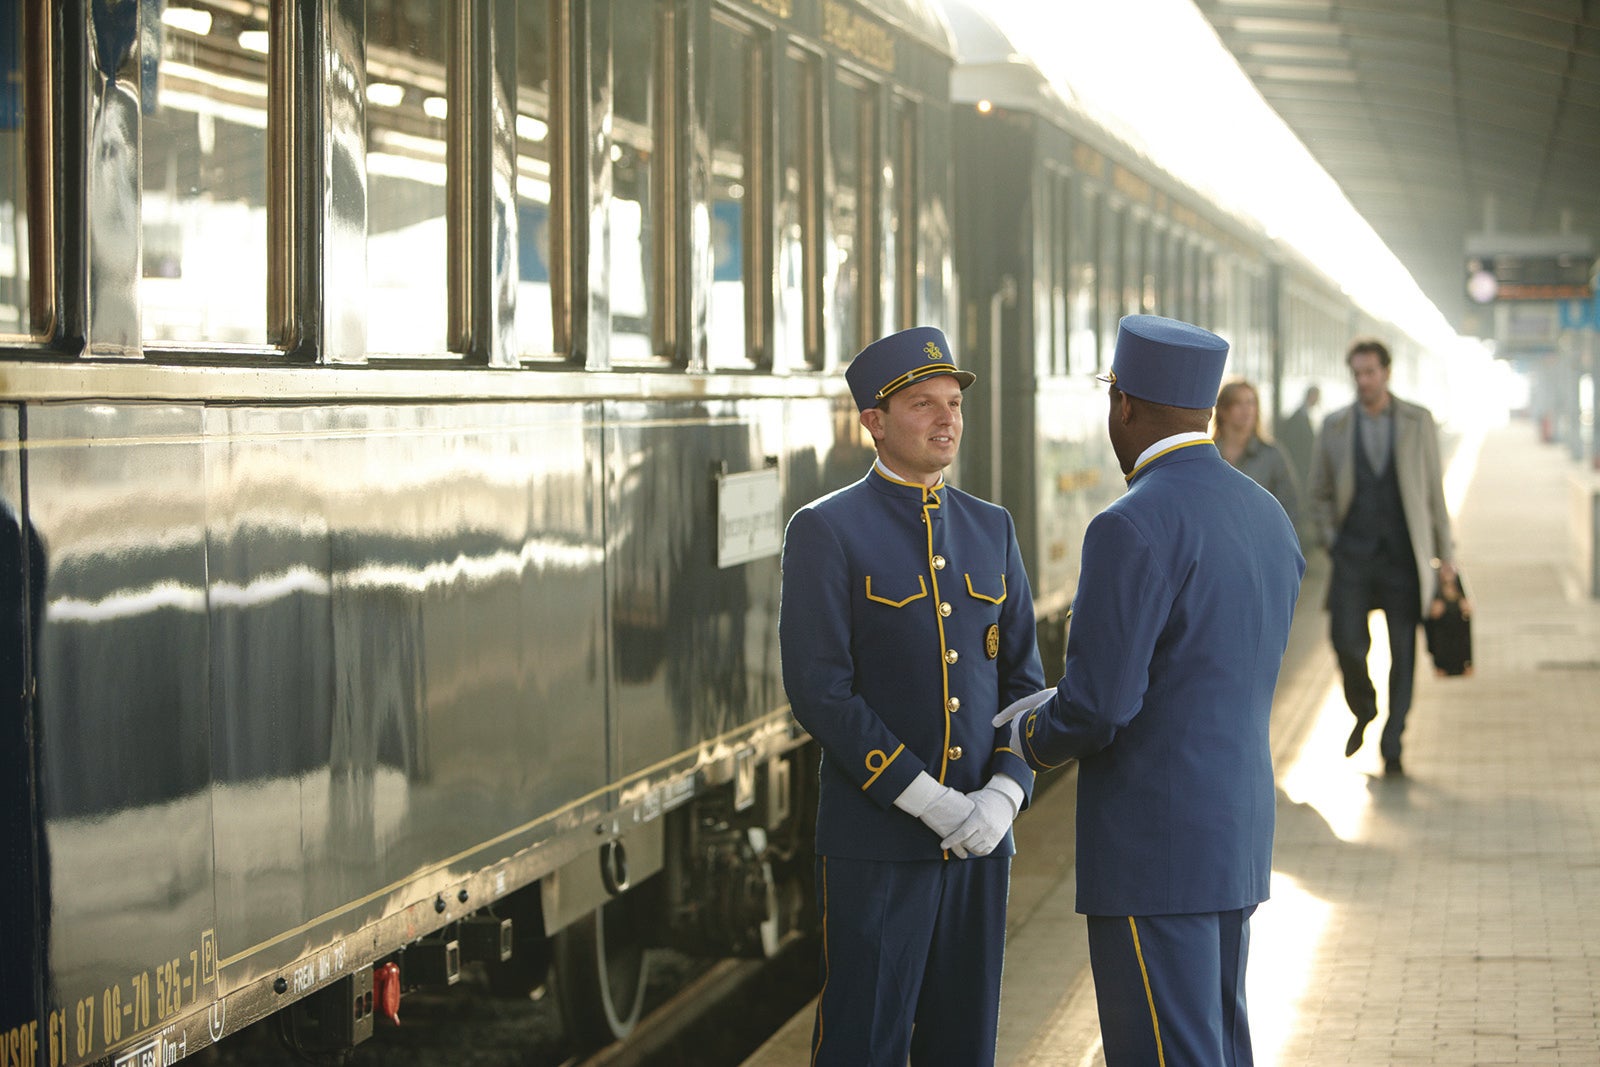 Where does the Orient Express go? Train has new European routes